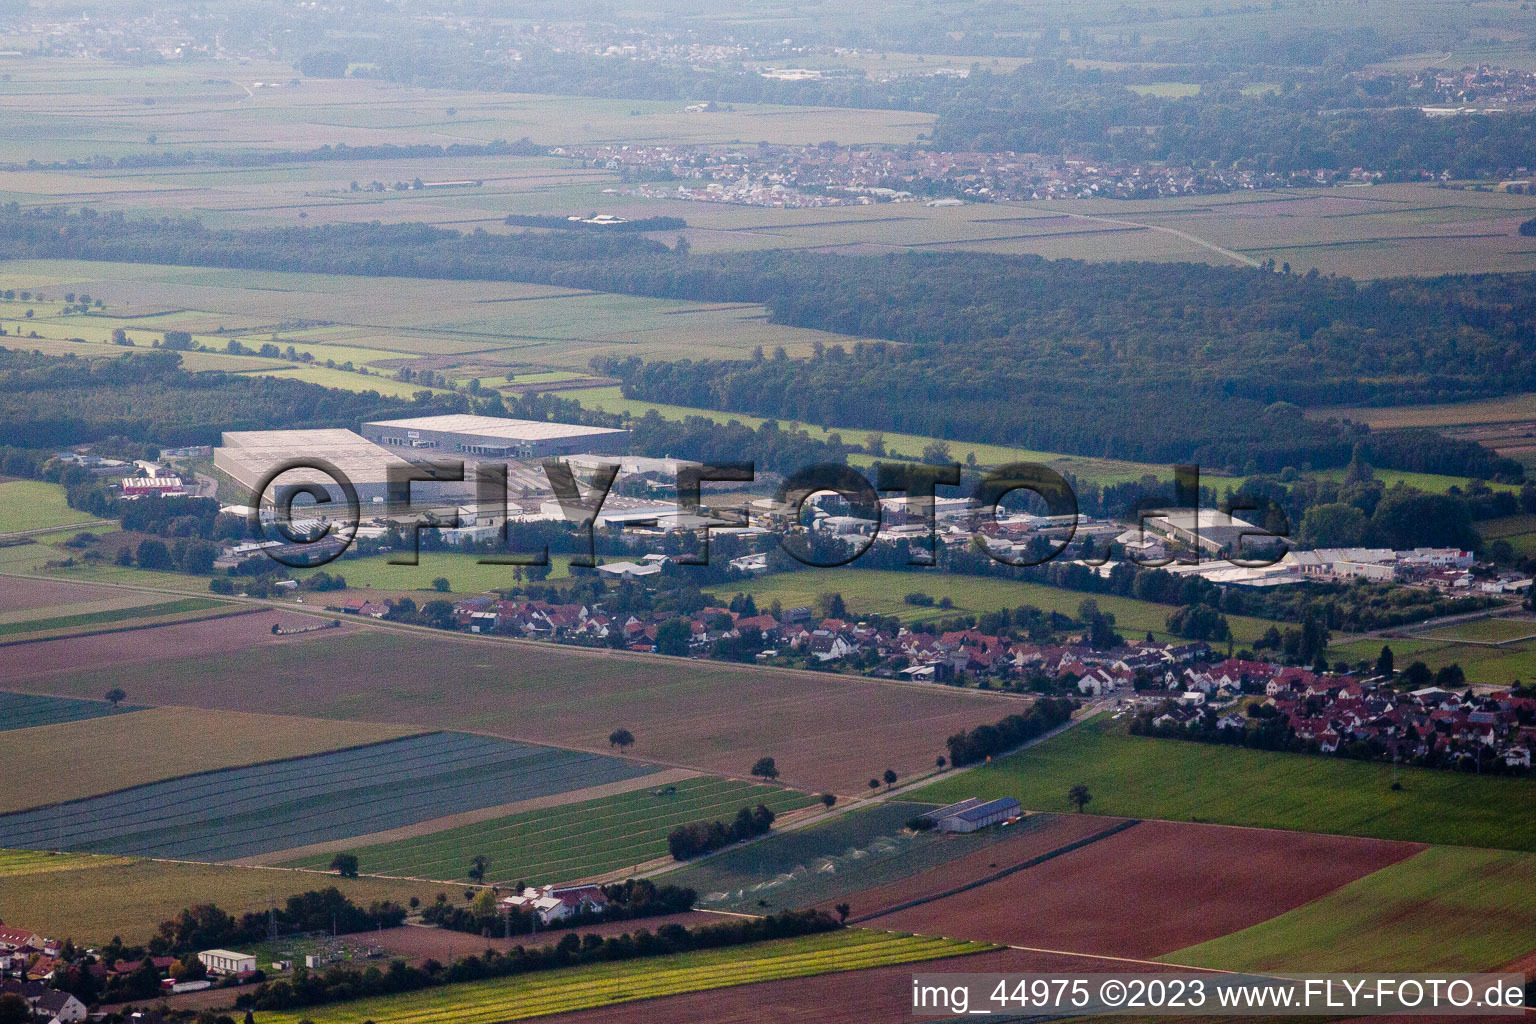 Horst industrial area in the district Minderslachen in Kandel in the state Rhineland-Palatinate, Germany viewn from the air